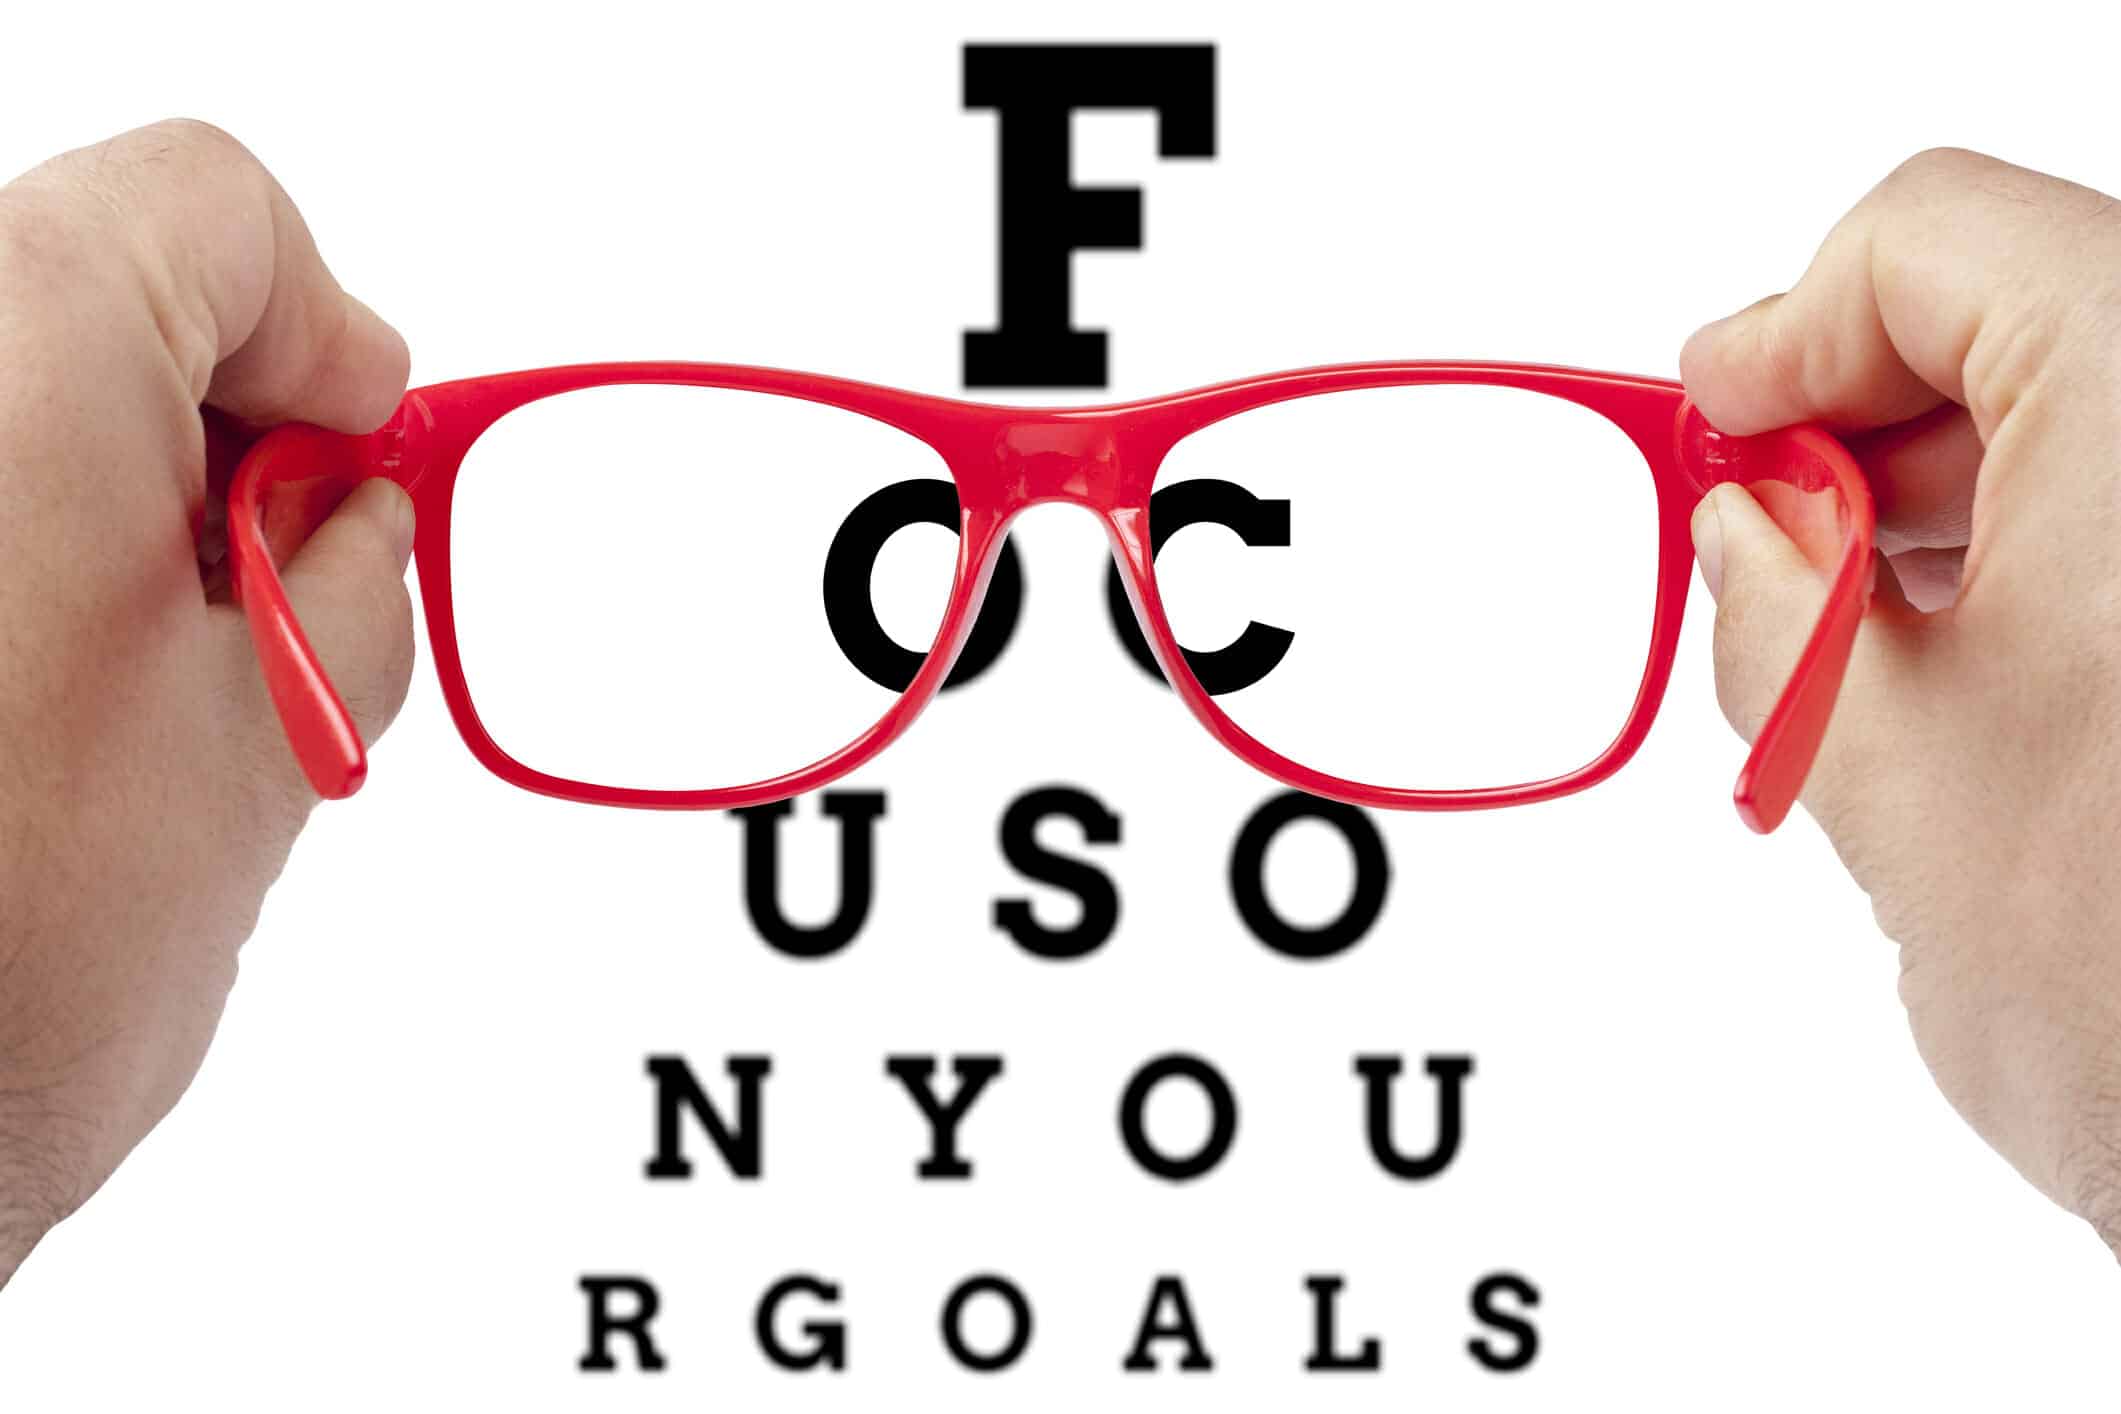 Hand holding red glasses. Behind is an eye chart with letters spelling: FOCUS ON YOUR GOALS.